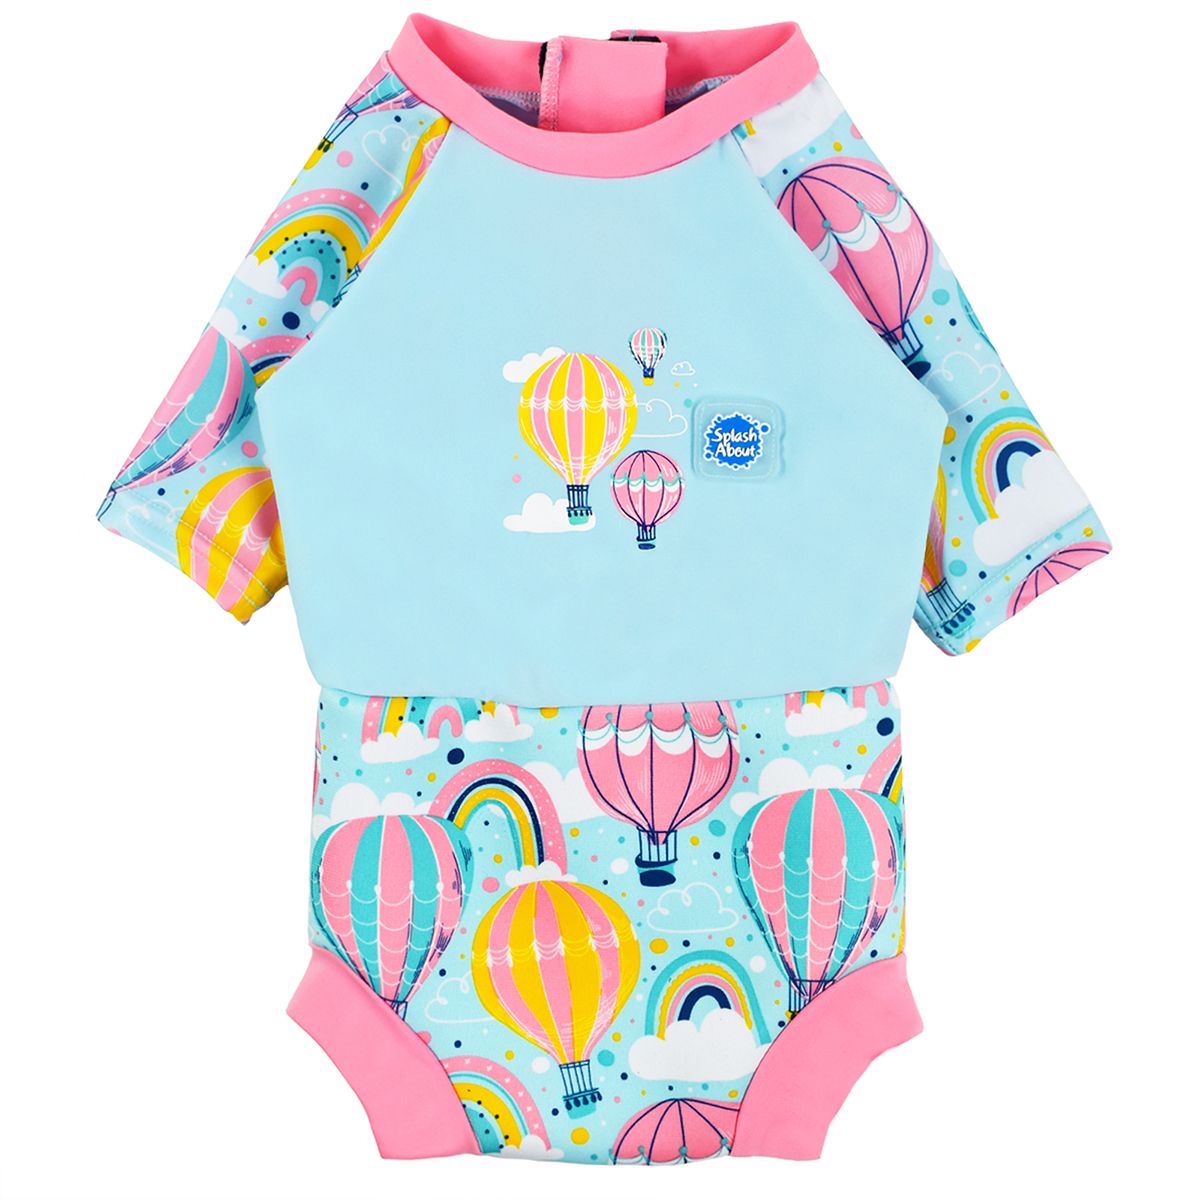 Happy Nappy Sunsuit in baby blue with pink trims and hot air balloons themed print, including rainbows and clouds. Front.